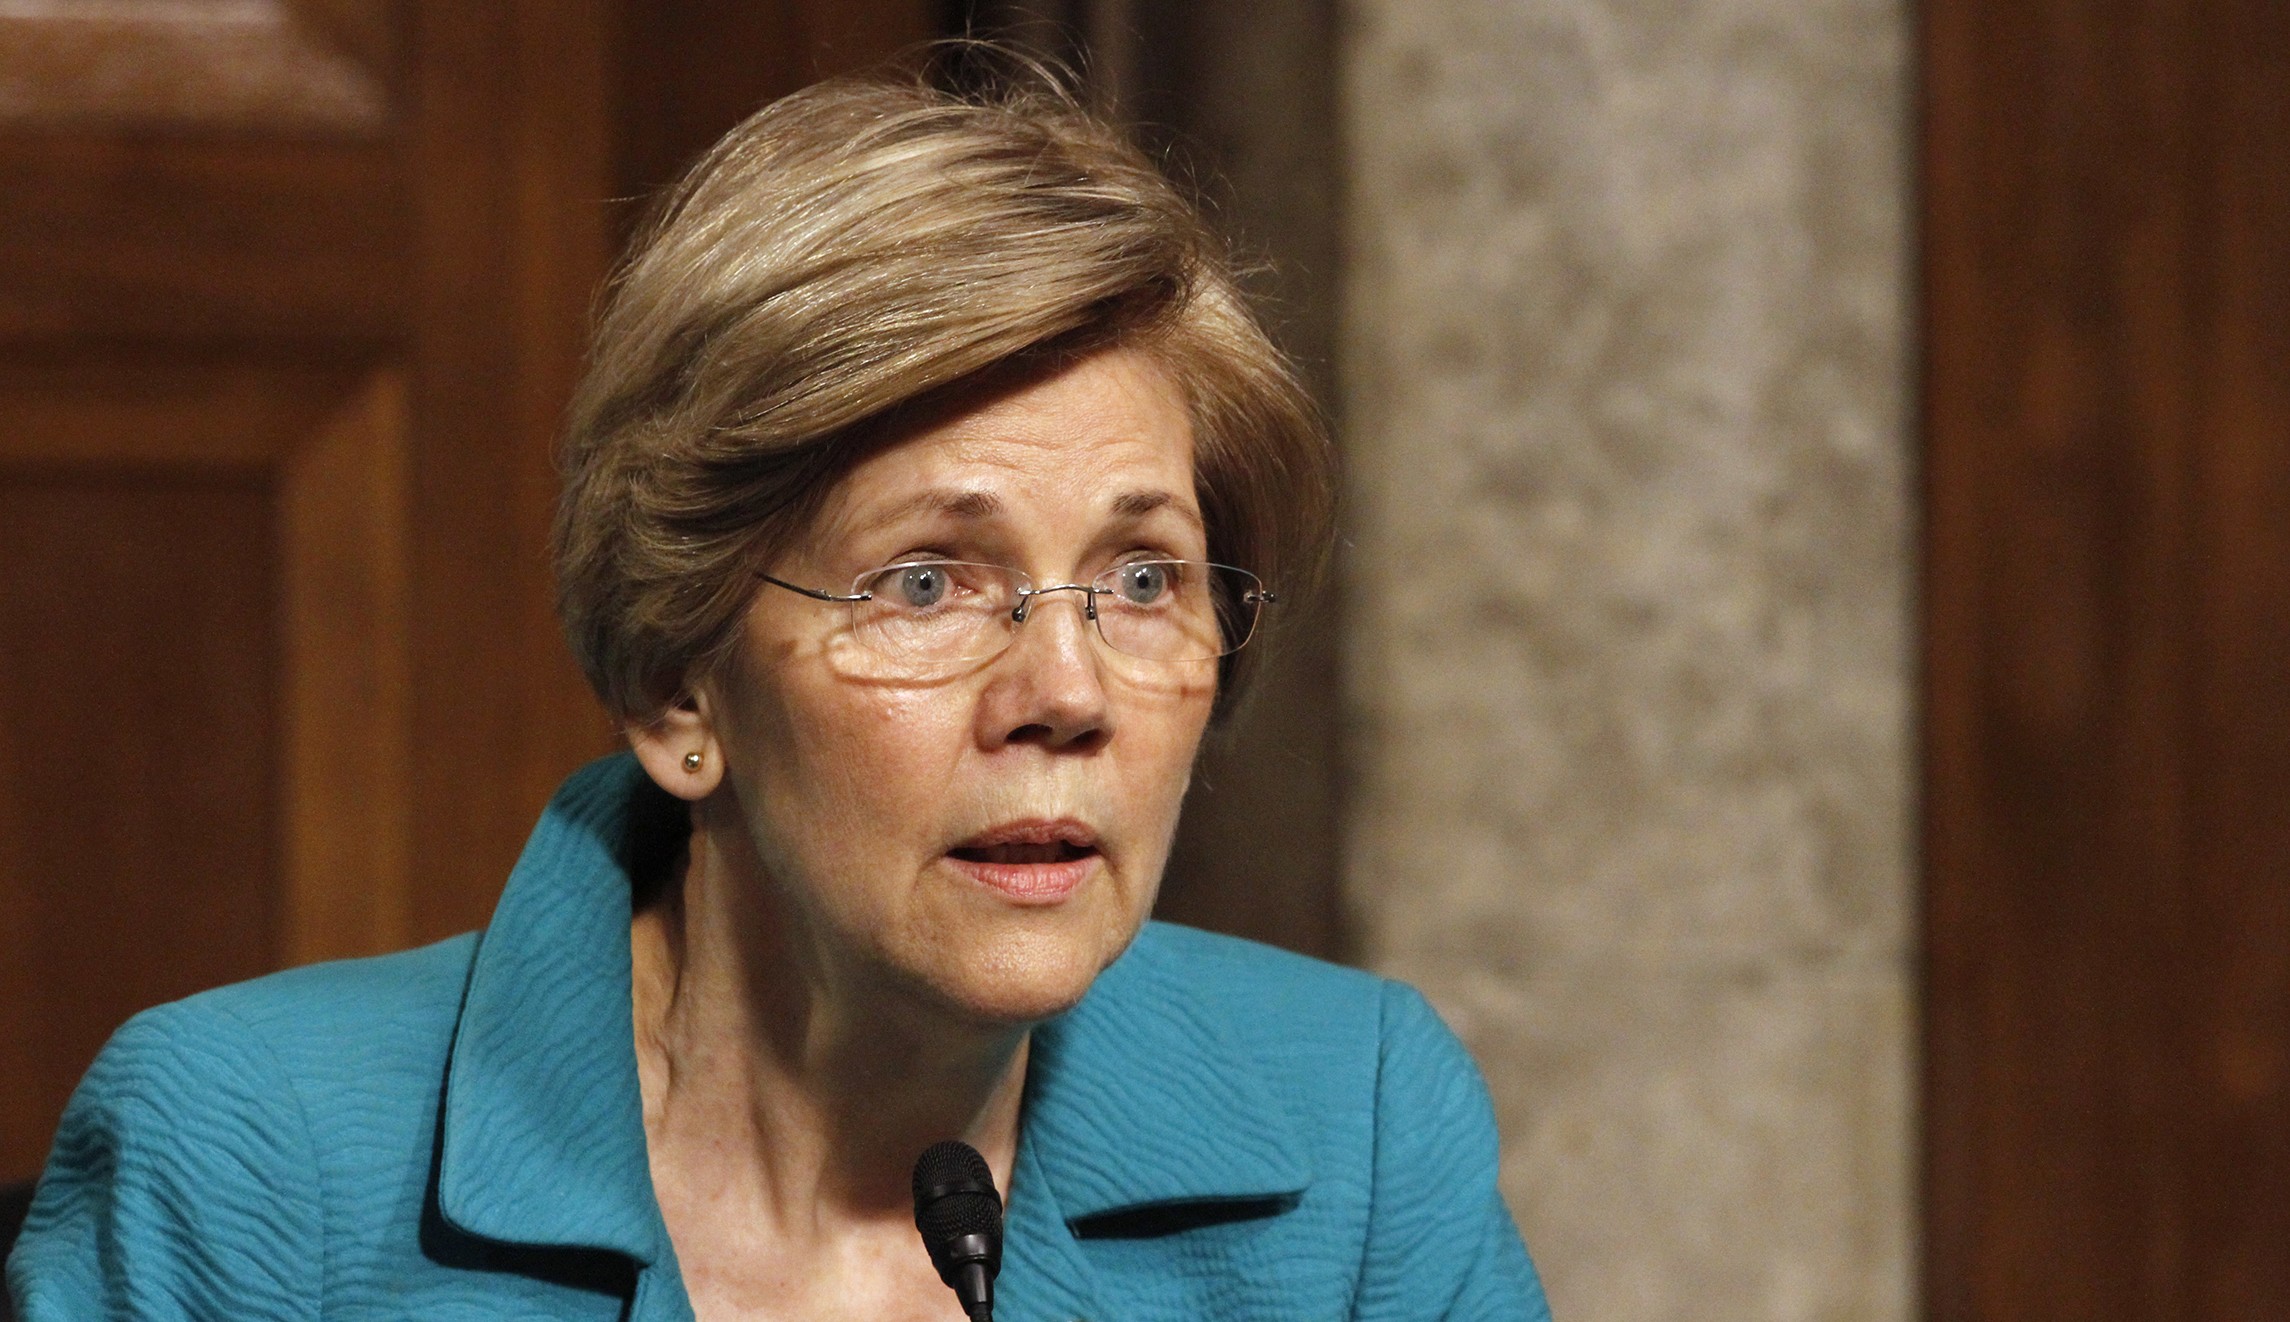 Elizabeth Warren Says She Would Have ‘ZERO’ Sympathy for College Tuition Scam (VIDEO)